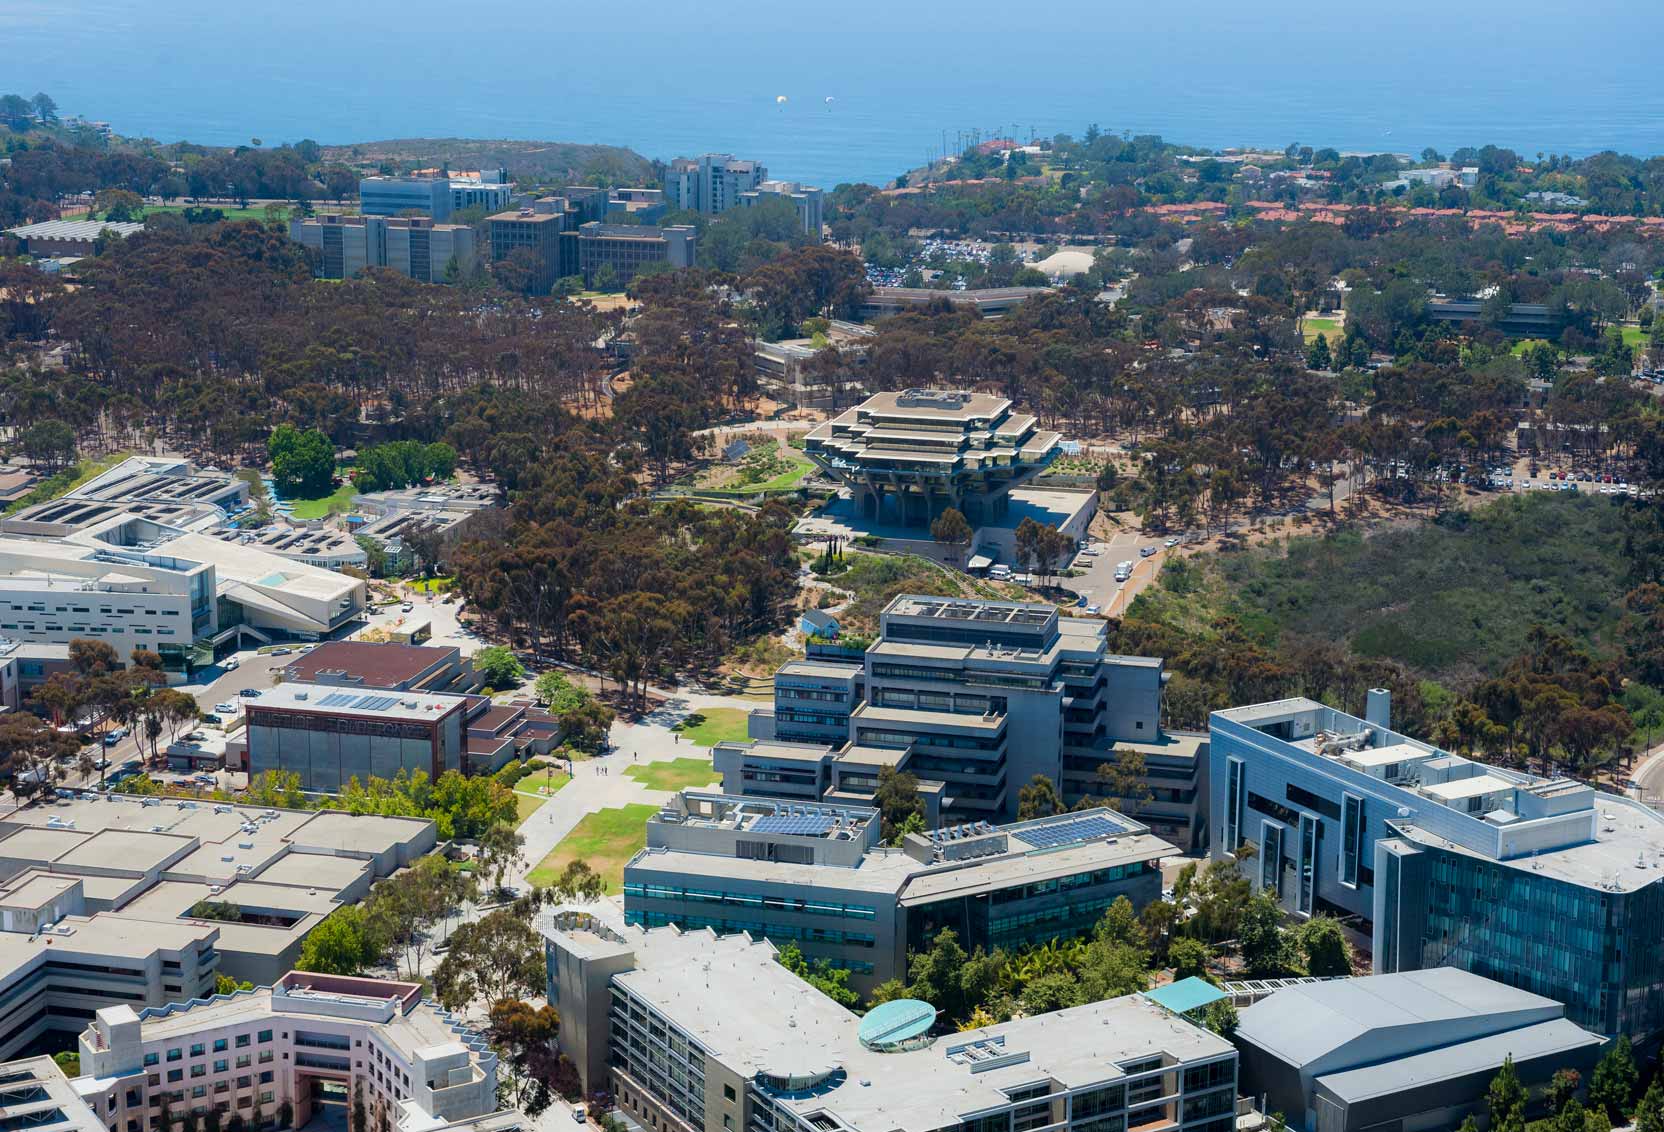 UC San Diego initiates a worldclass real estate and development